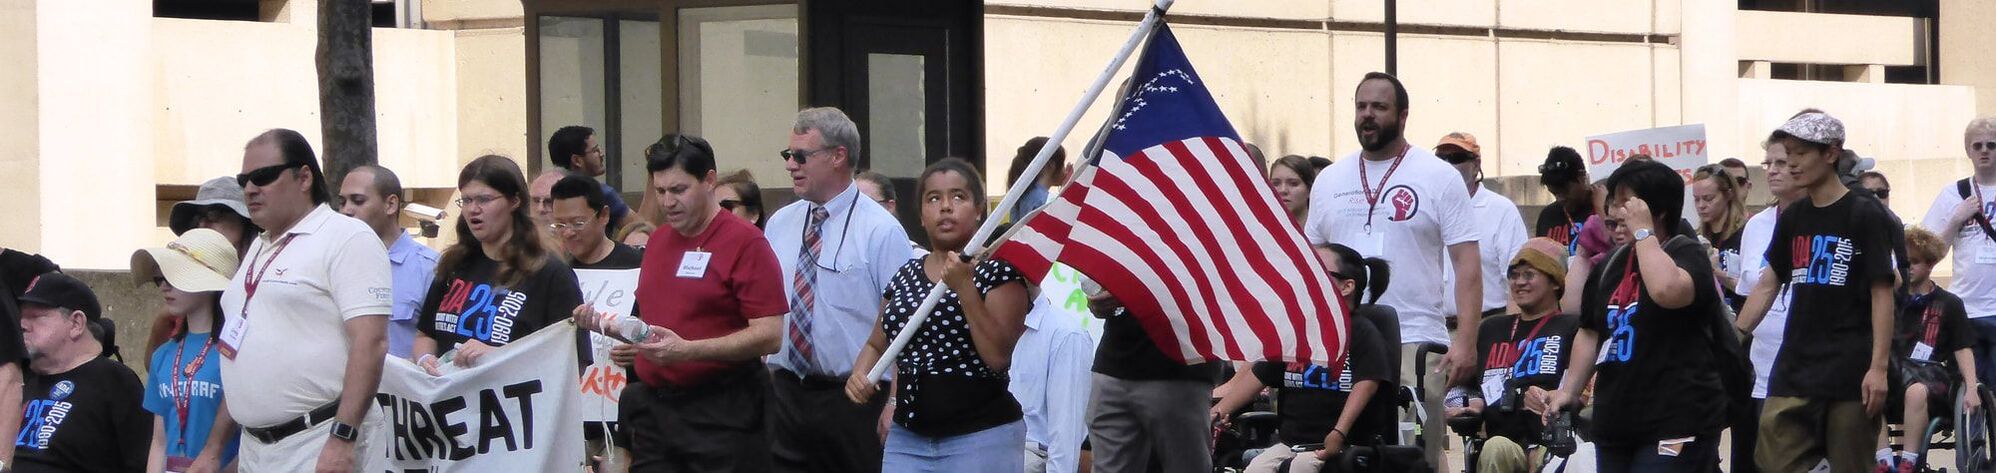 Gril with flag in Washington DC during ADA celebration